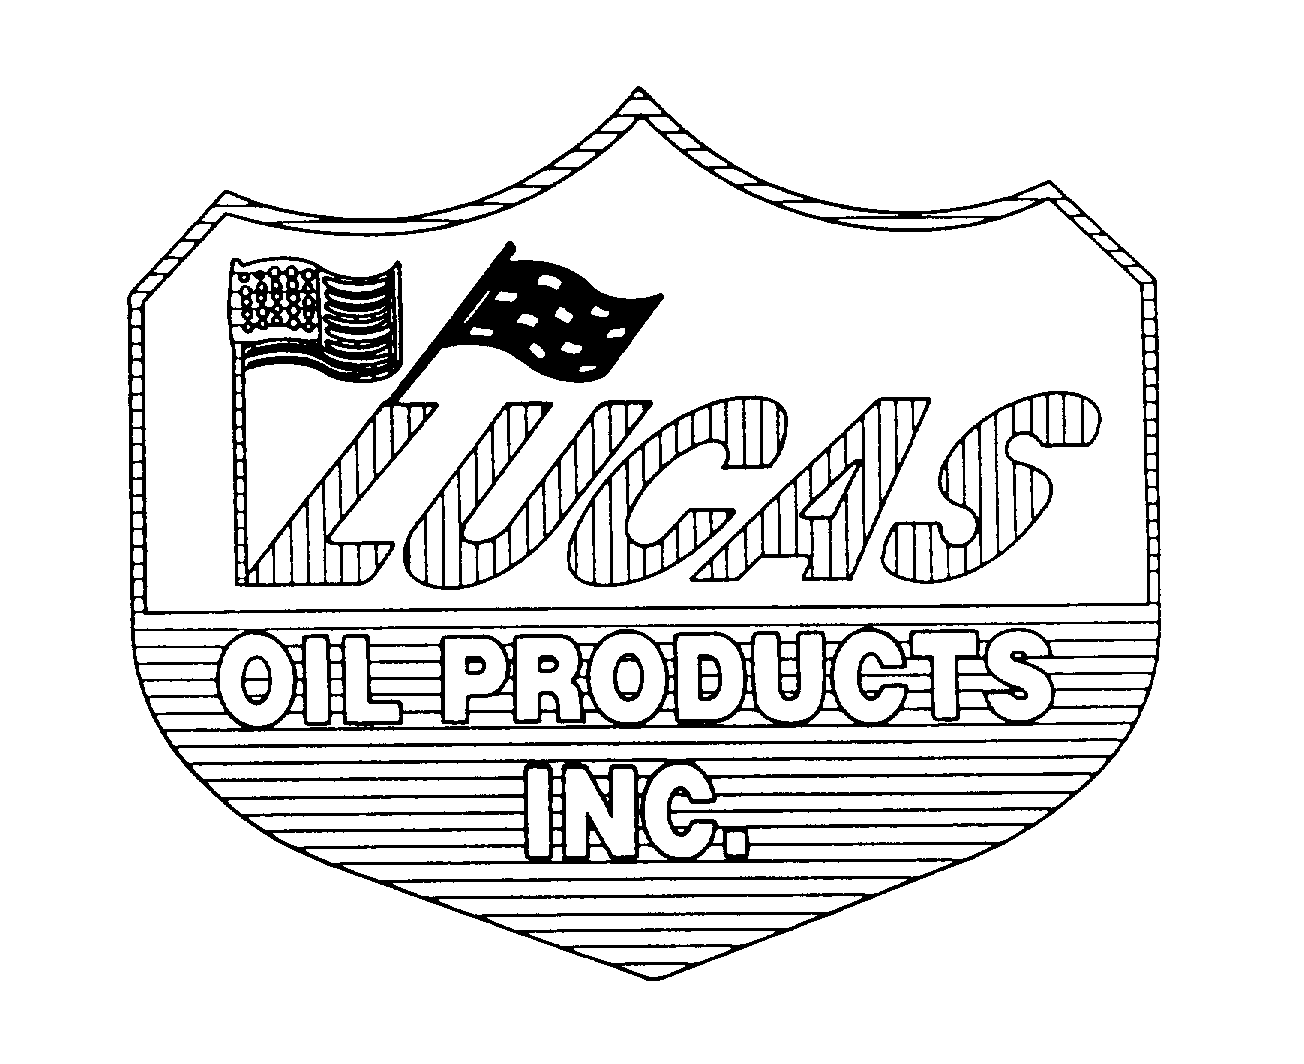  LUCAS OIL PRODUCTS INC.